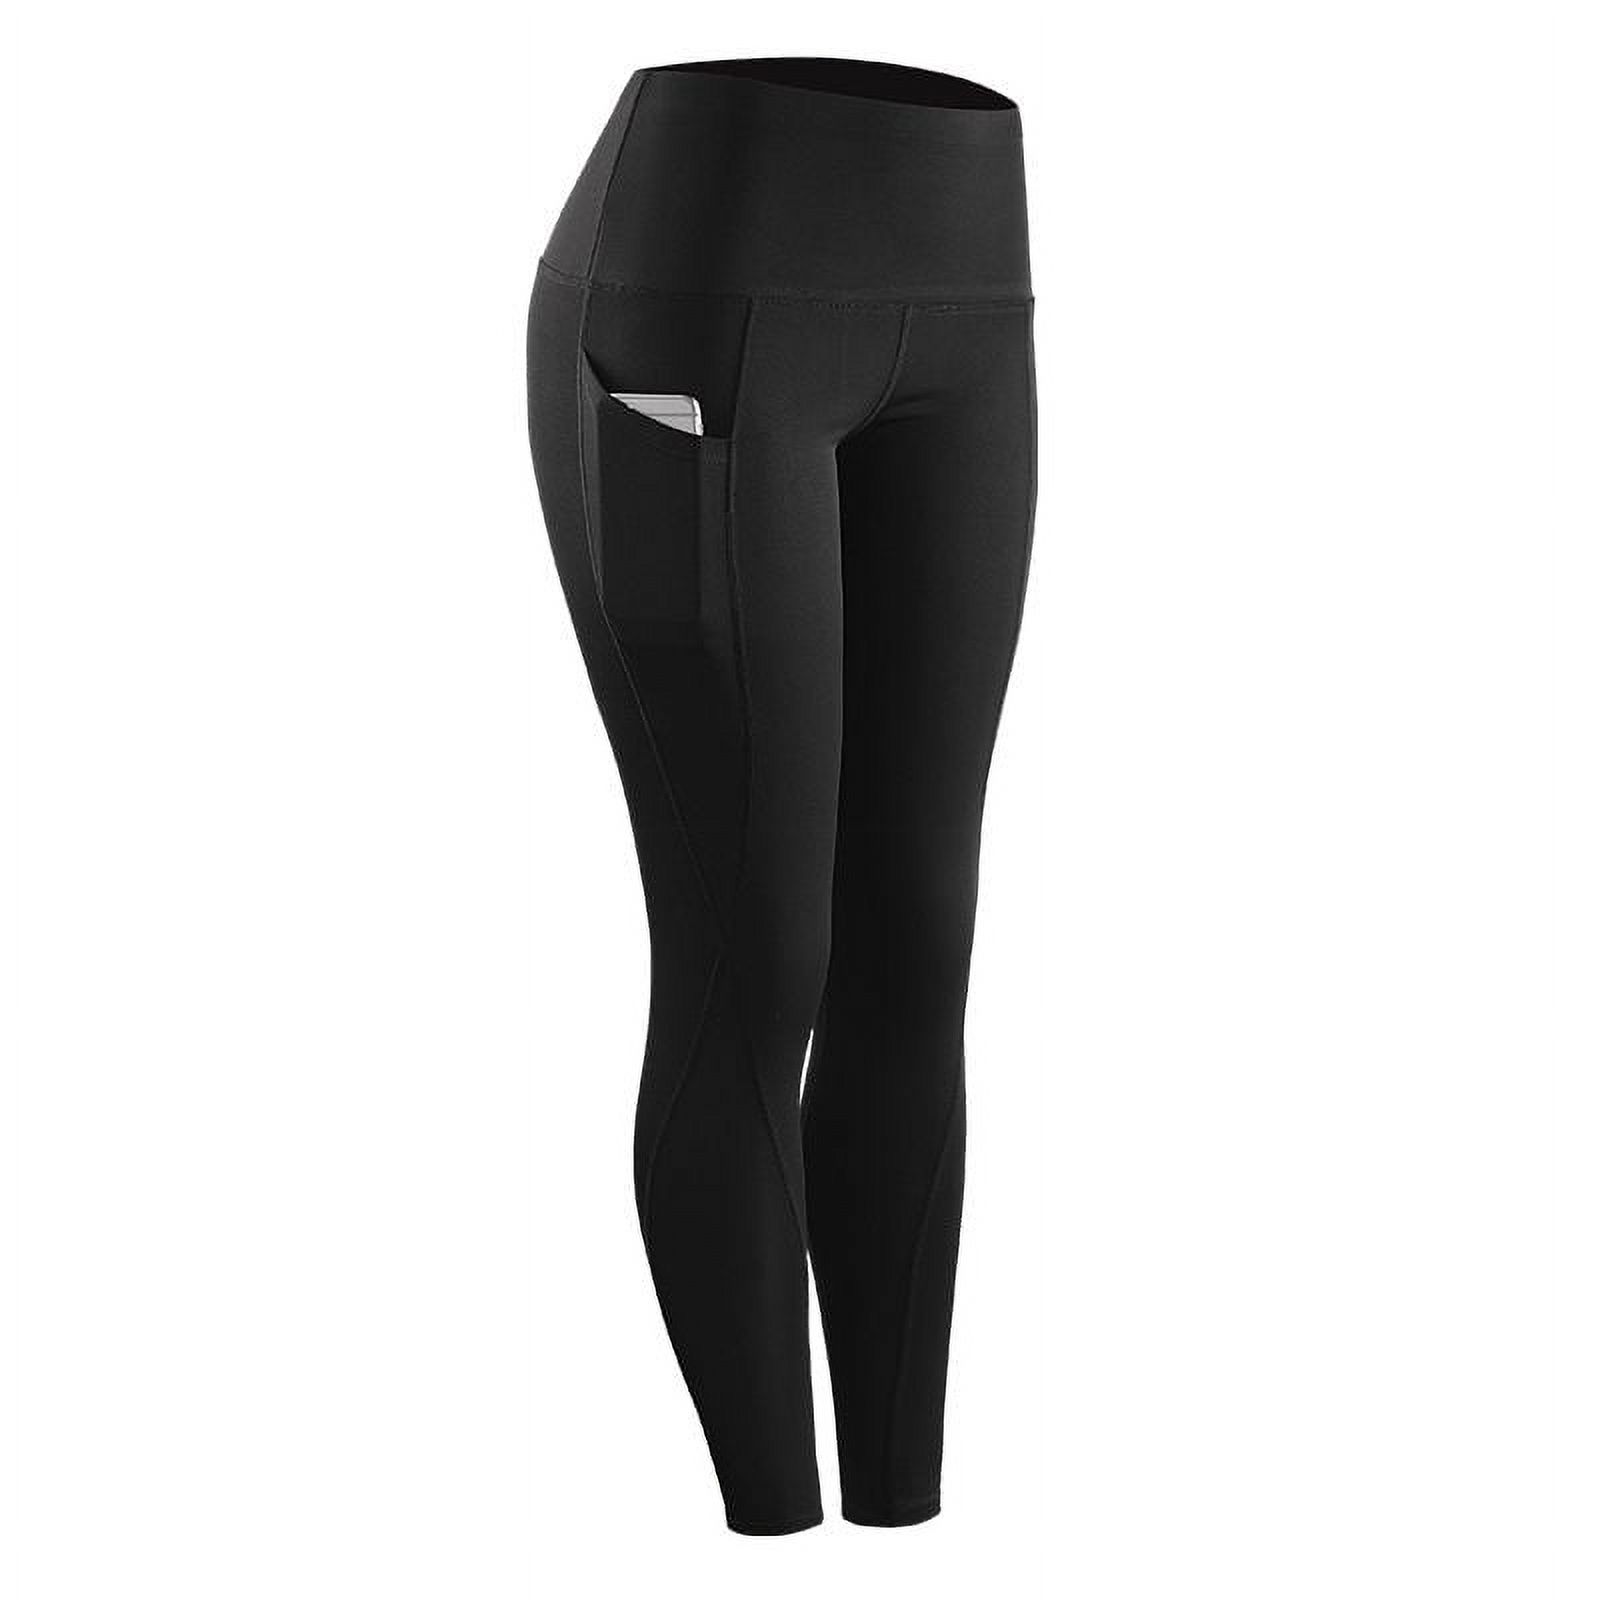 High Elastic Leggings Pant Women Solid Stretch Compression Sportswear Casual Yoga Jogging Leggings Pants With Pocket Black XXL - image 5 of 7